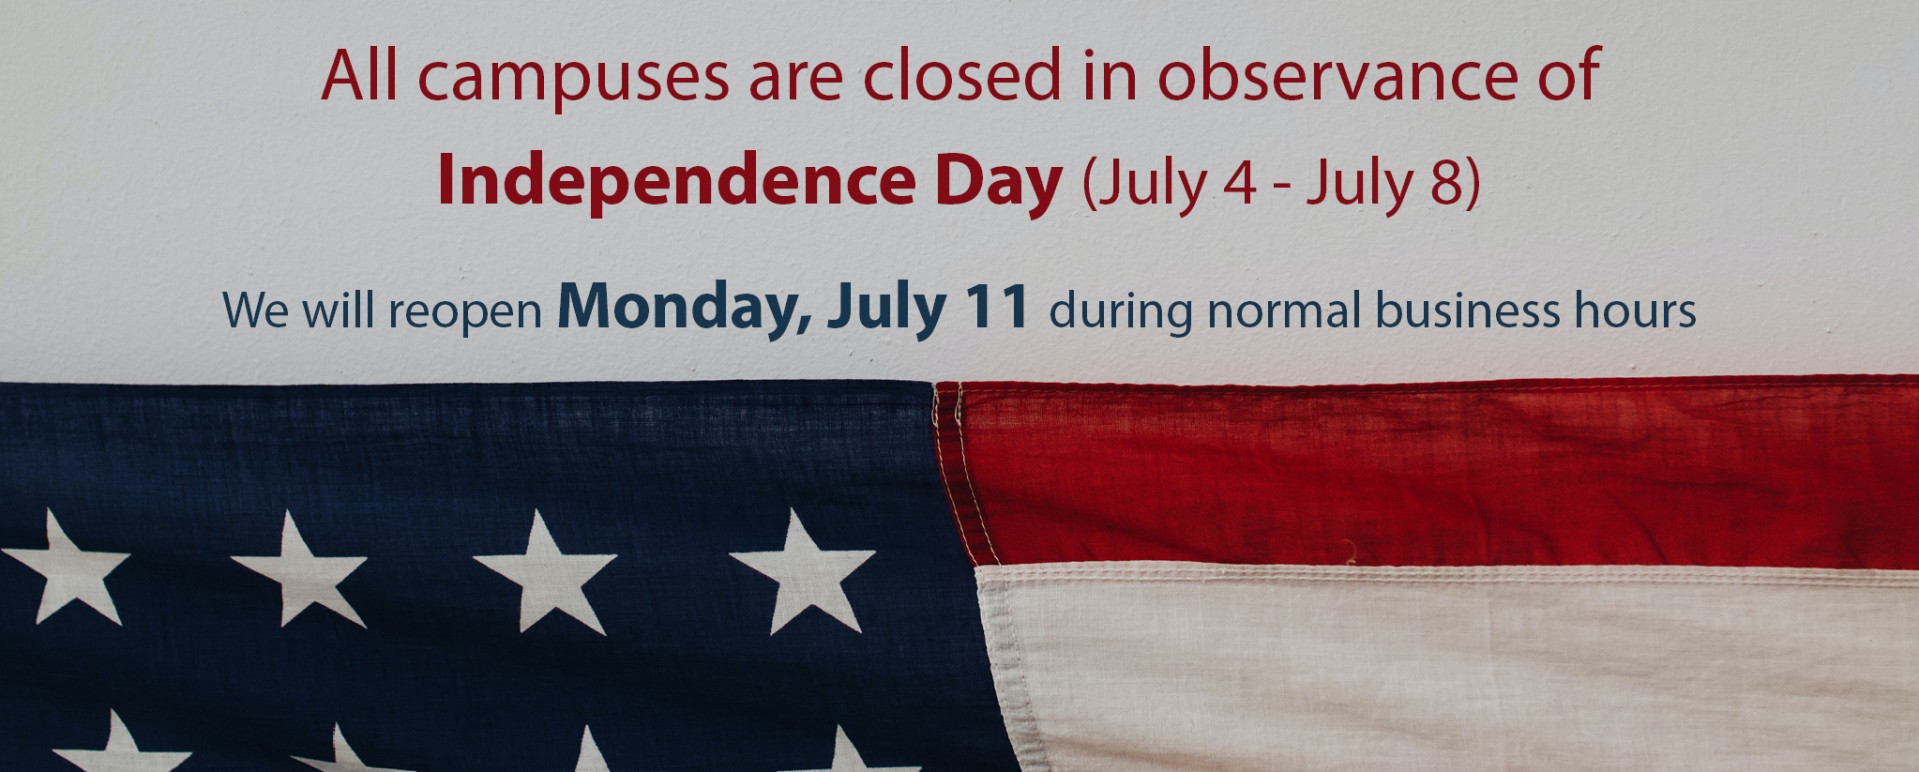 We will reopen Monday, July 11 during normal business hours.